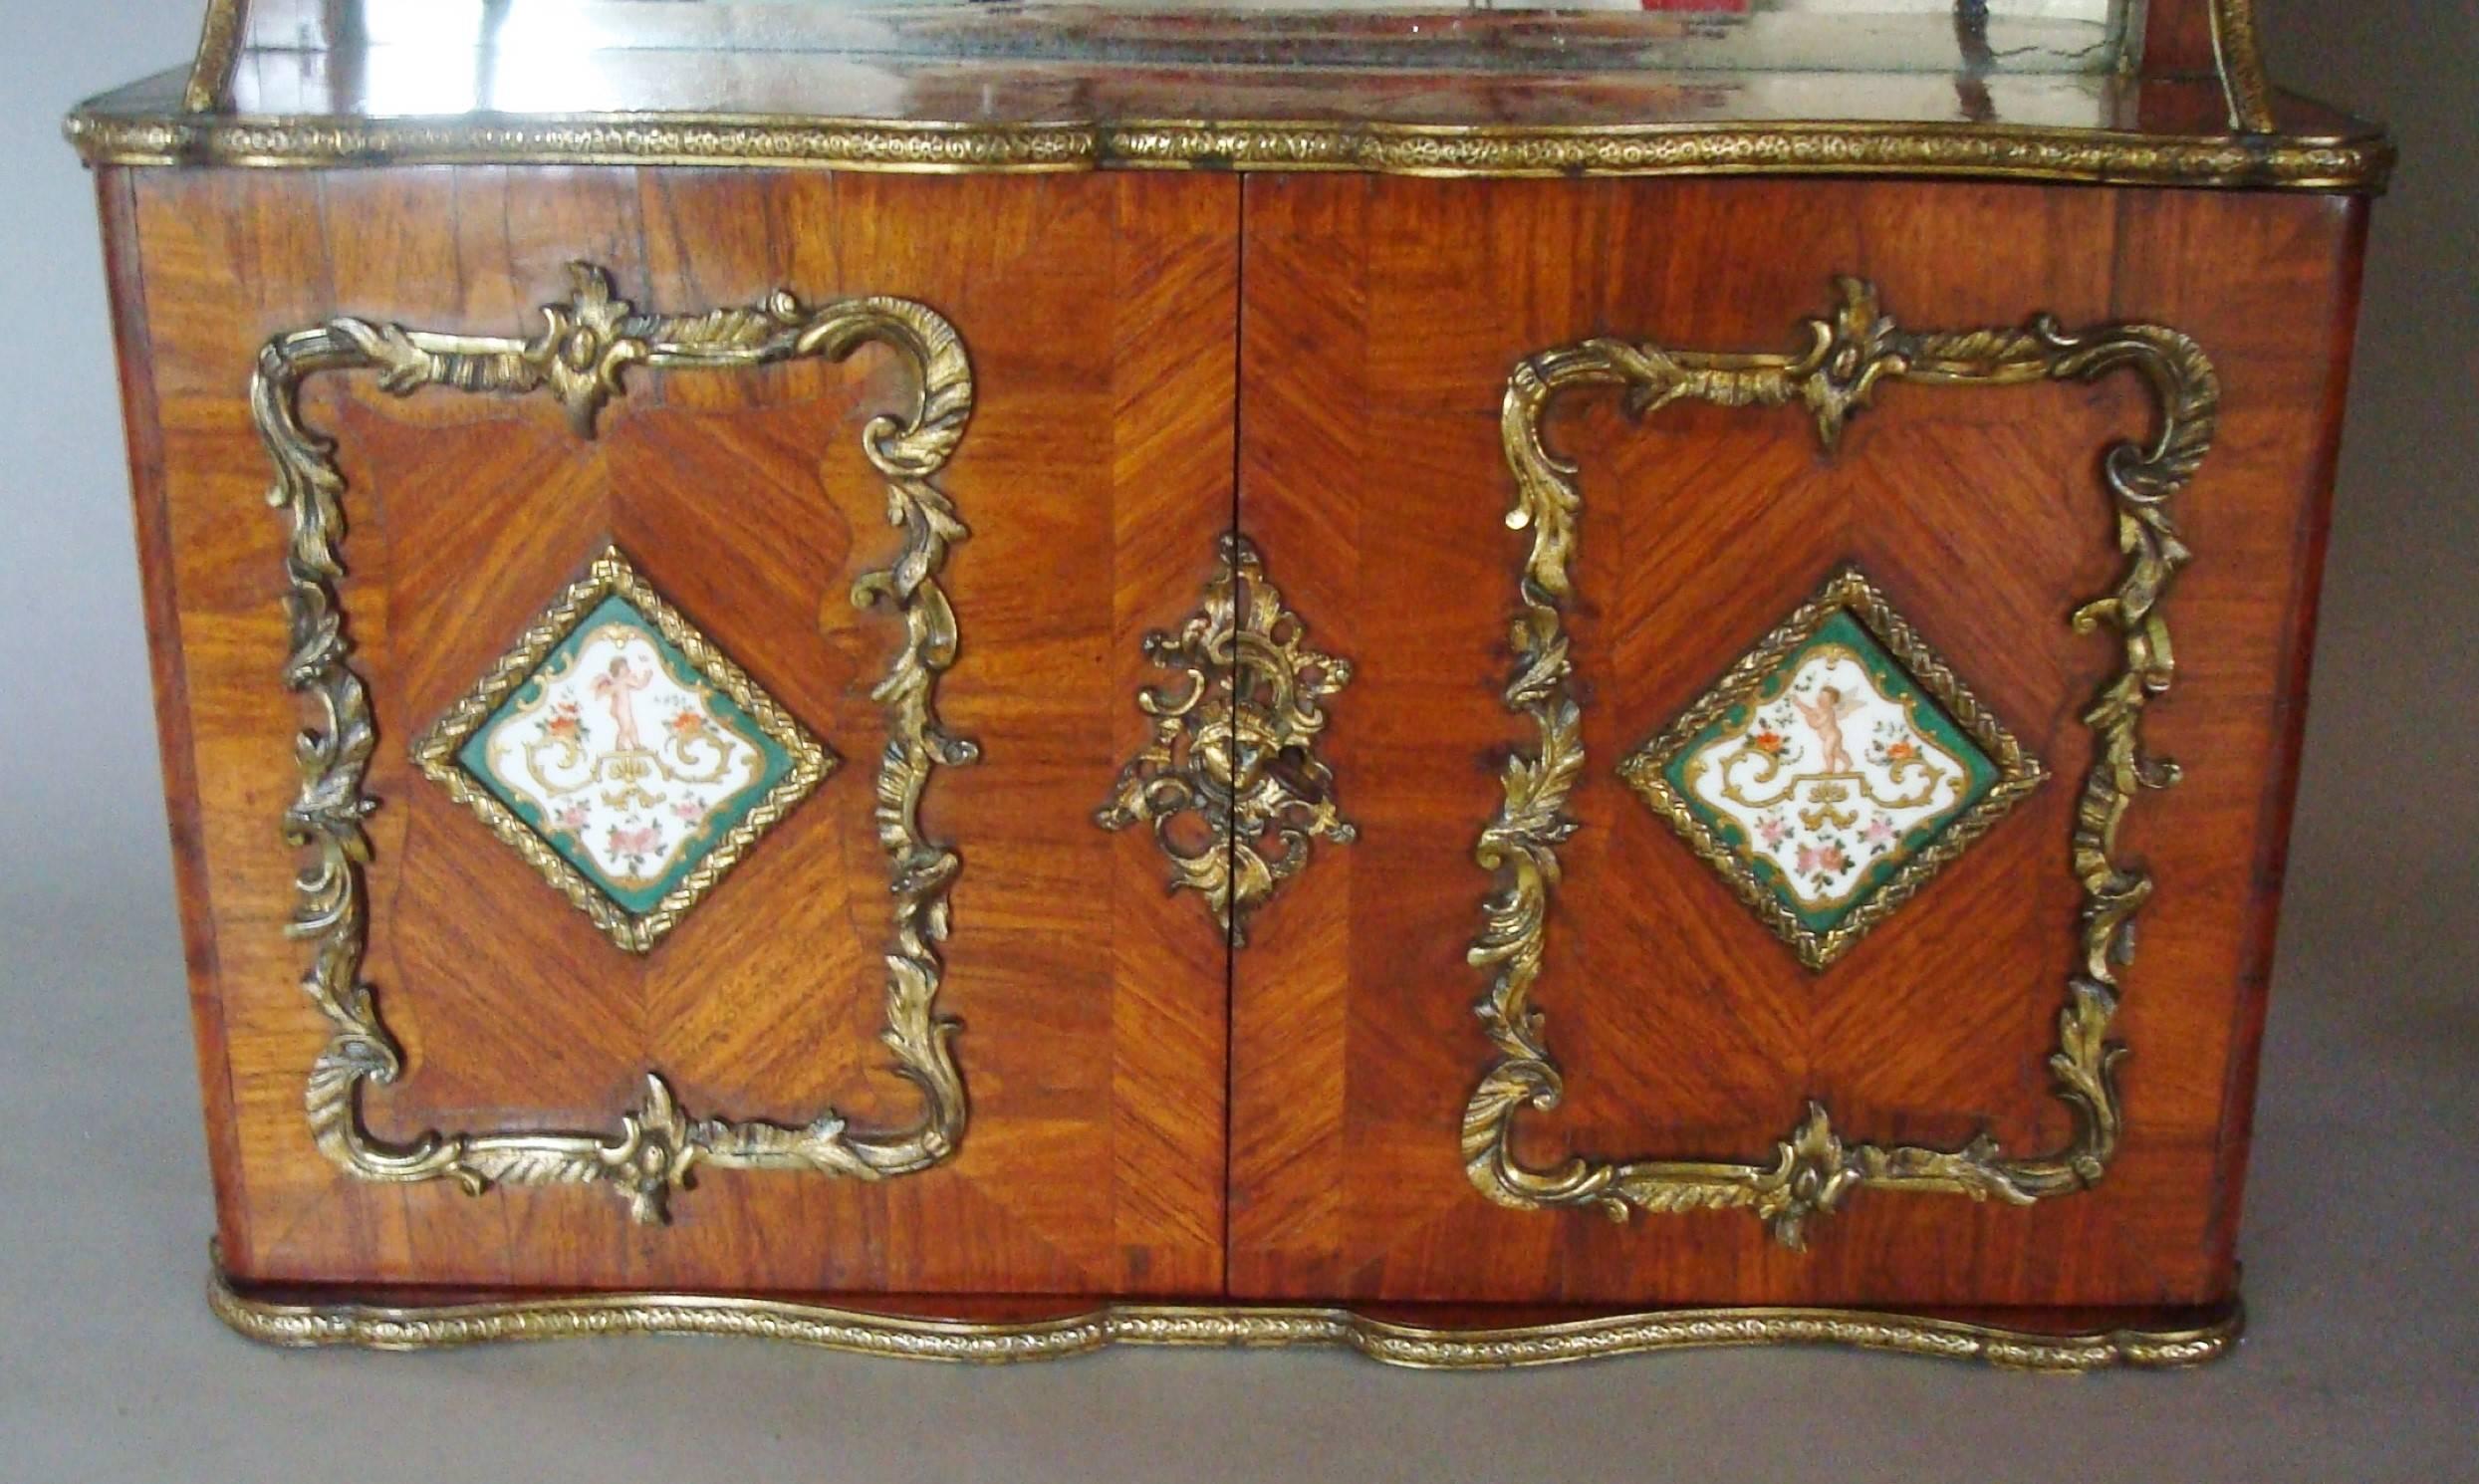 Louis XV Exceptional 19th Century Pair of English Hanging Wall Cabinets by Town & Emanuel For Sale